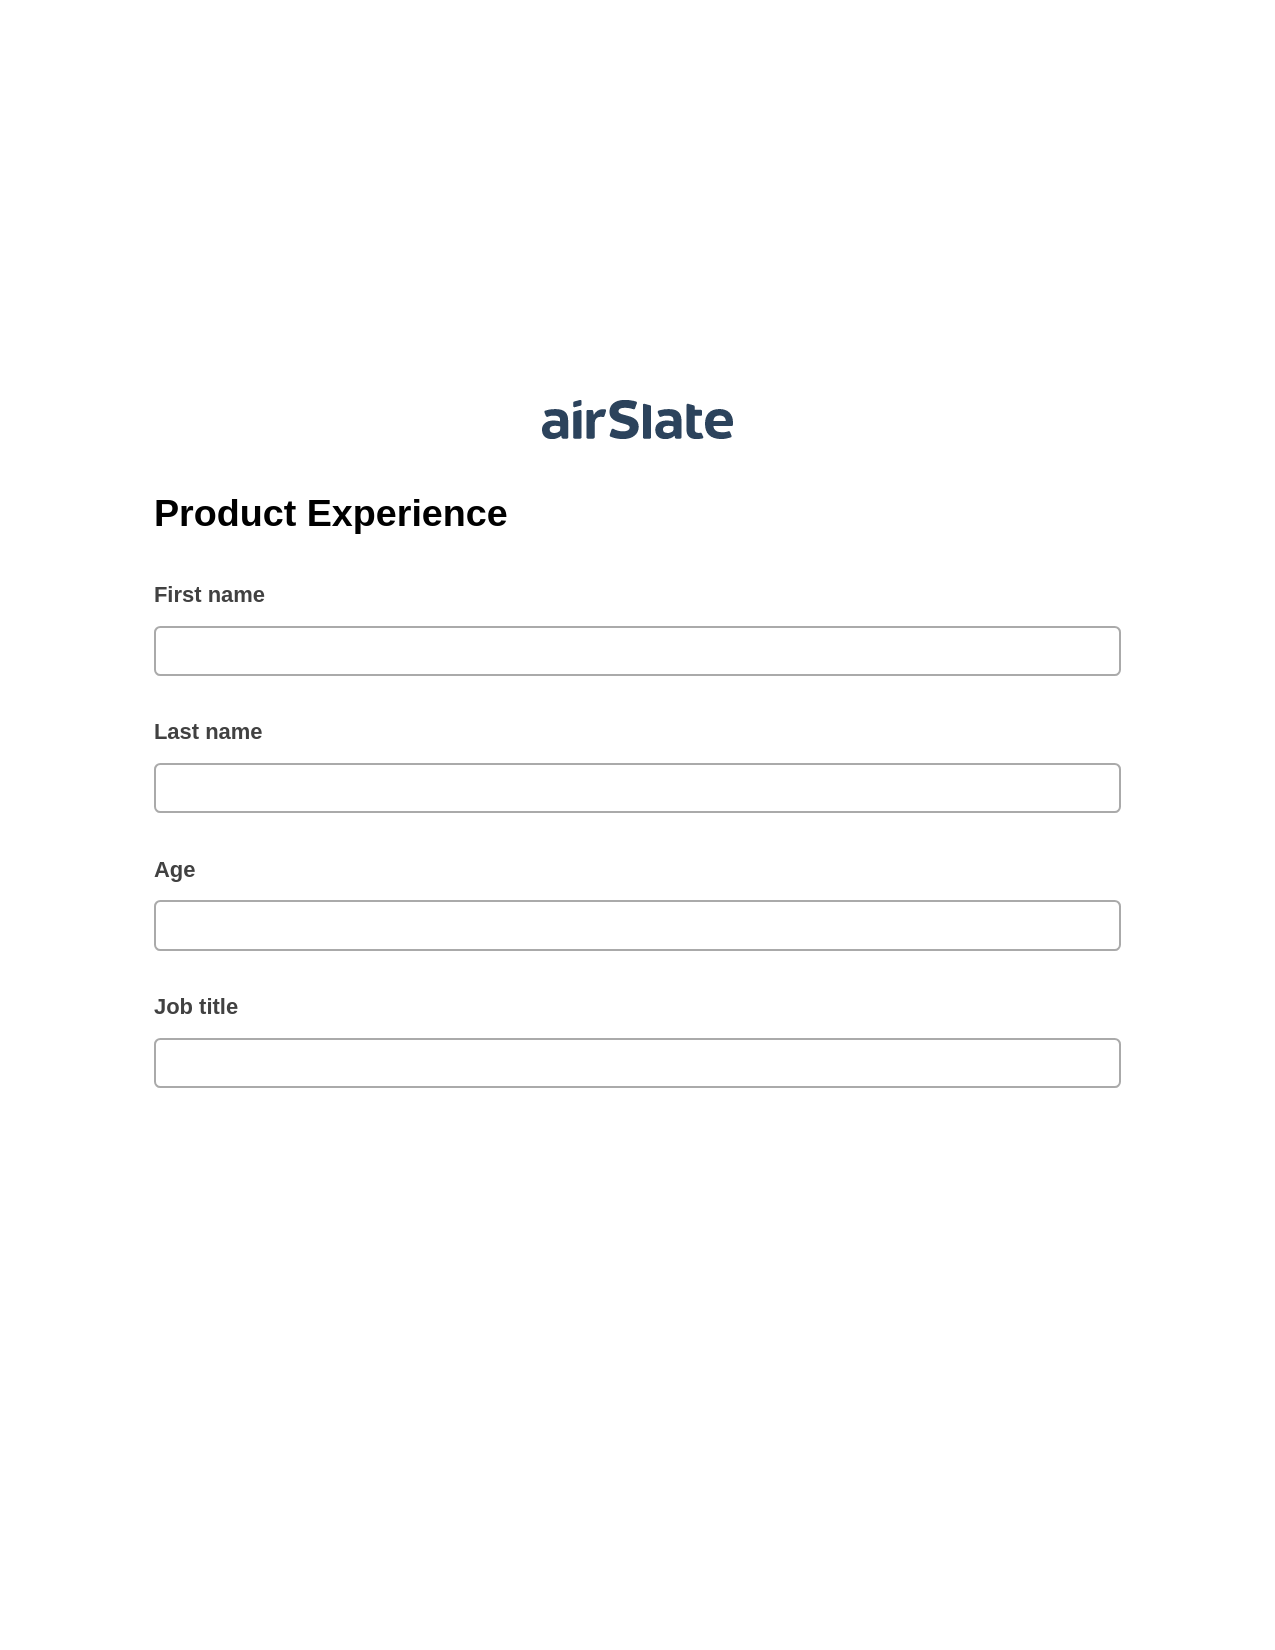 Product Experience Pre-fill from Salesforce Records Bot, Update Salesforce Records Bot, Webhook Postfinish Bot